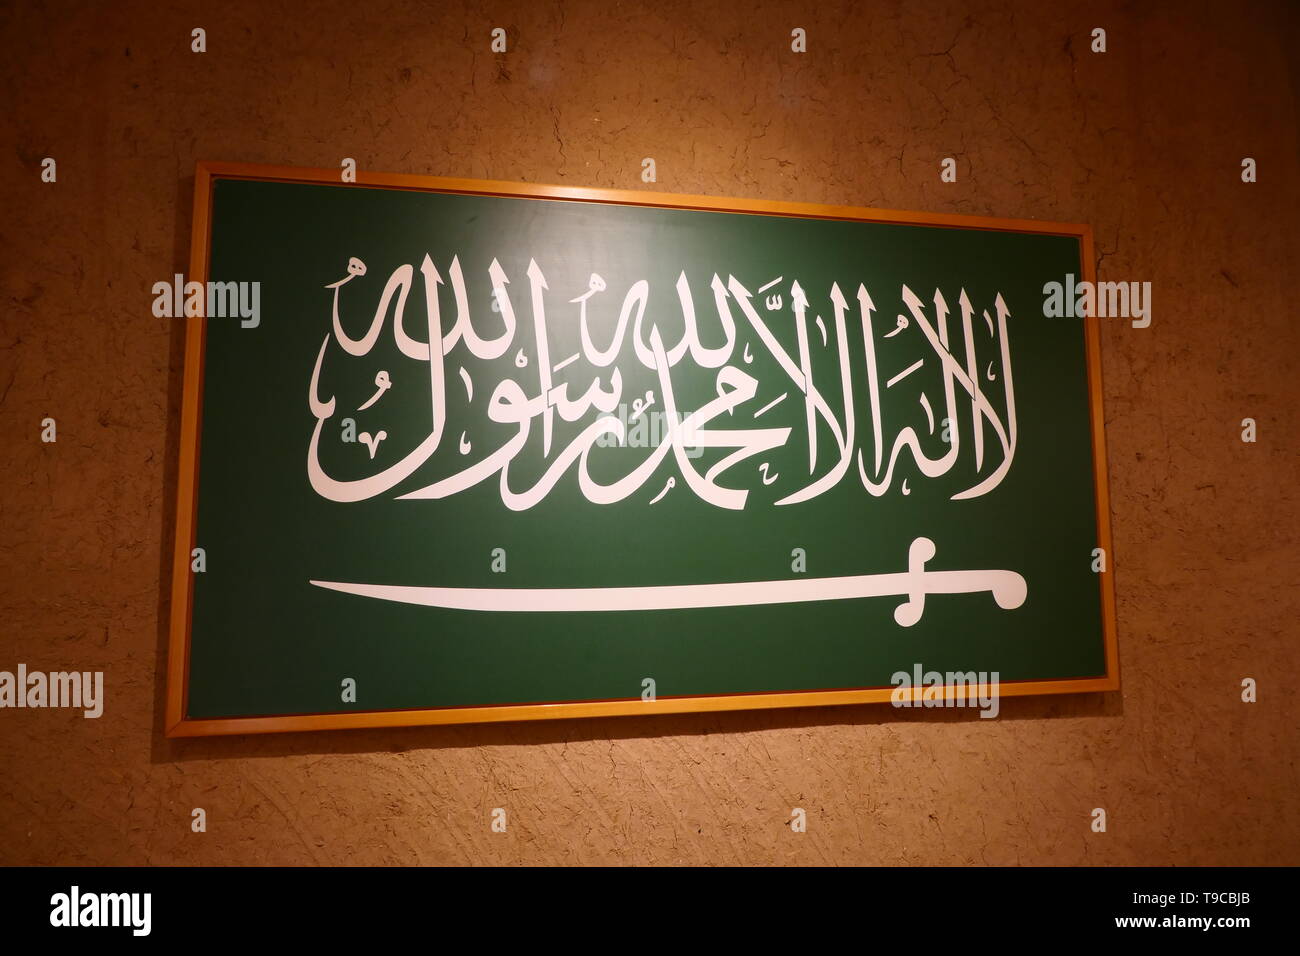 The flag of the Kingdom of Saudi Arabia, presented in a picture frame Stock Photo